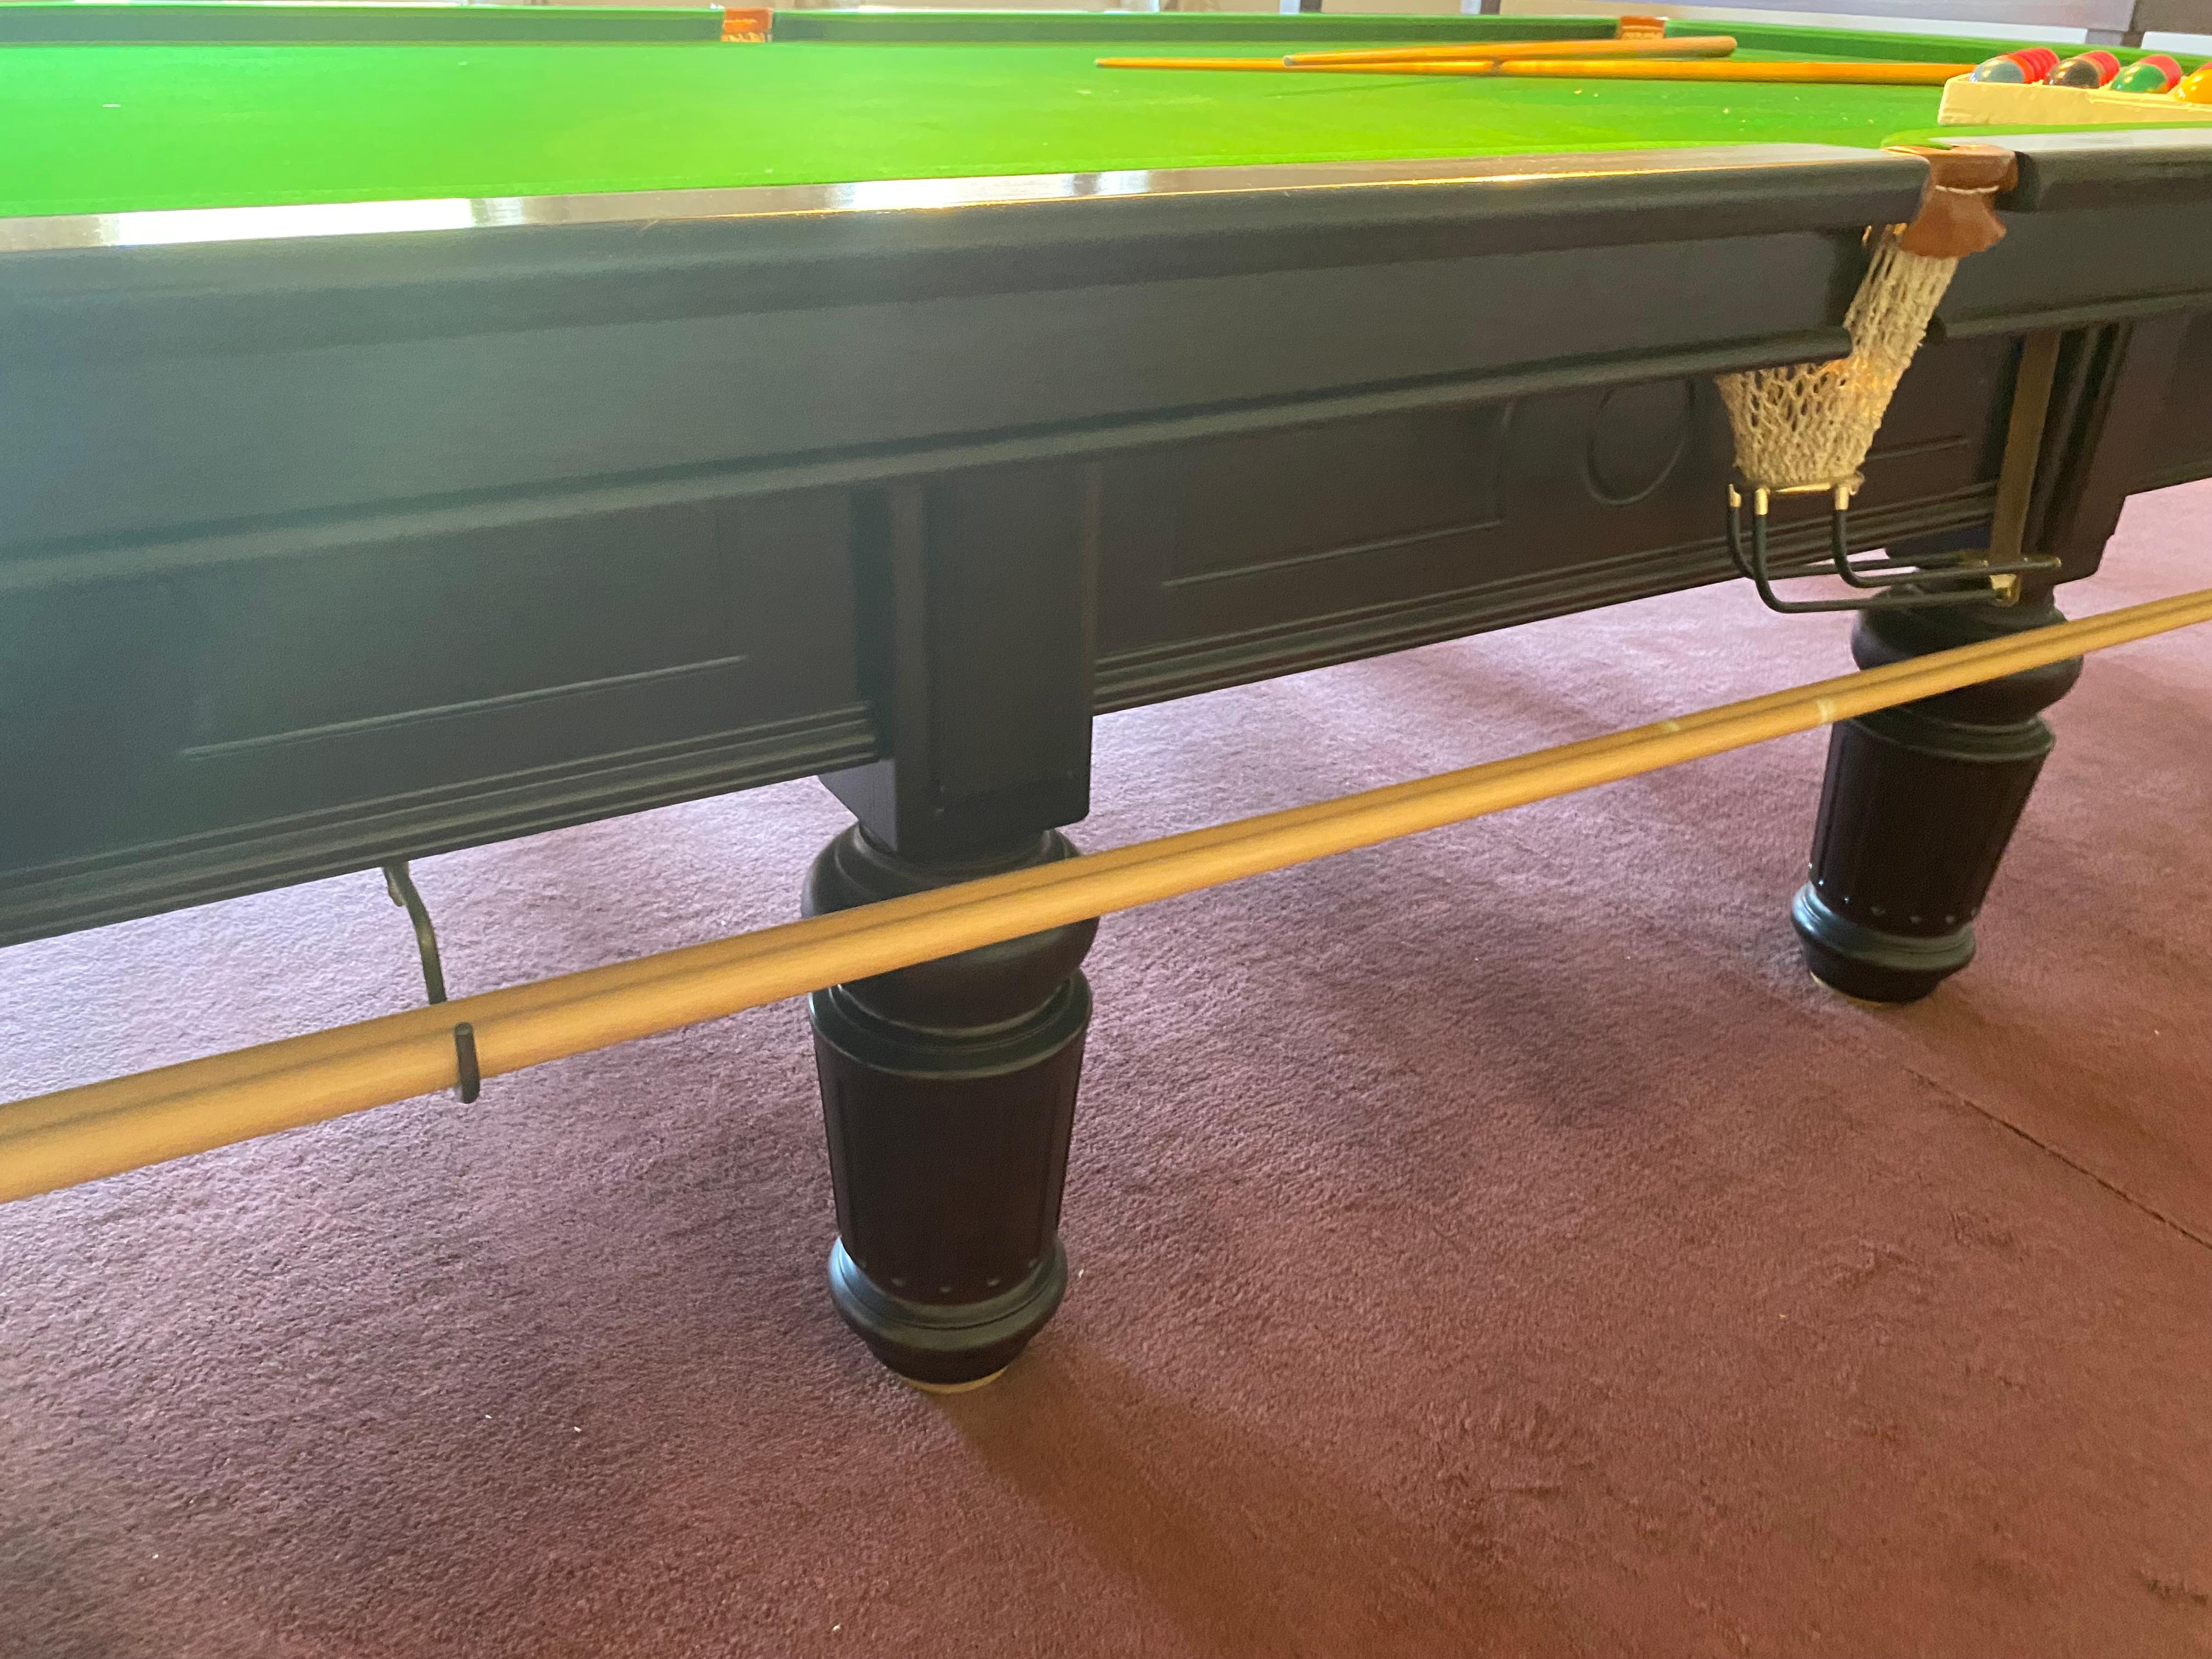 12 ft snooker table